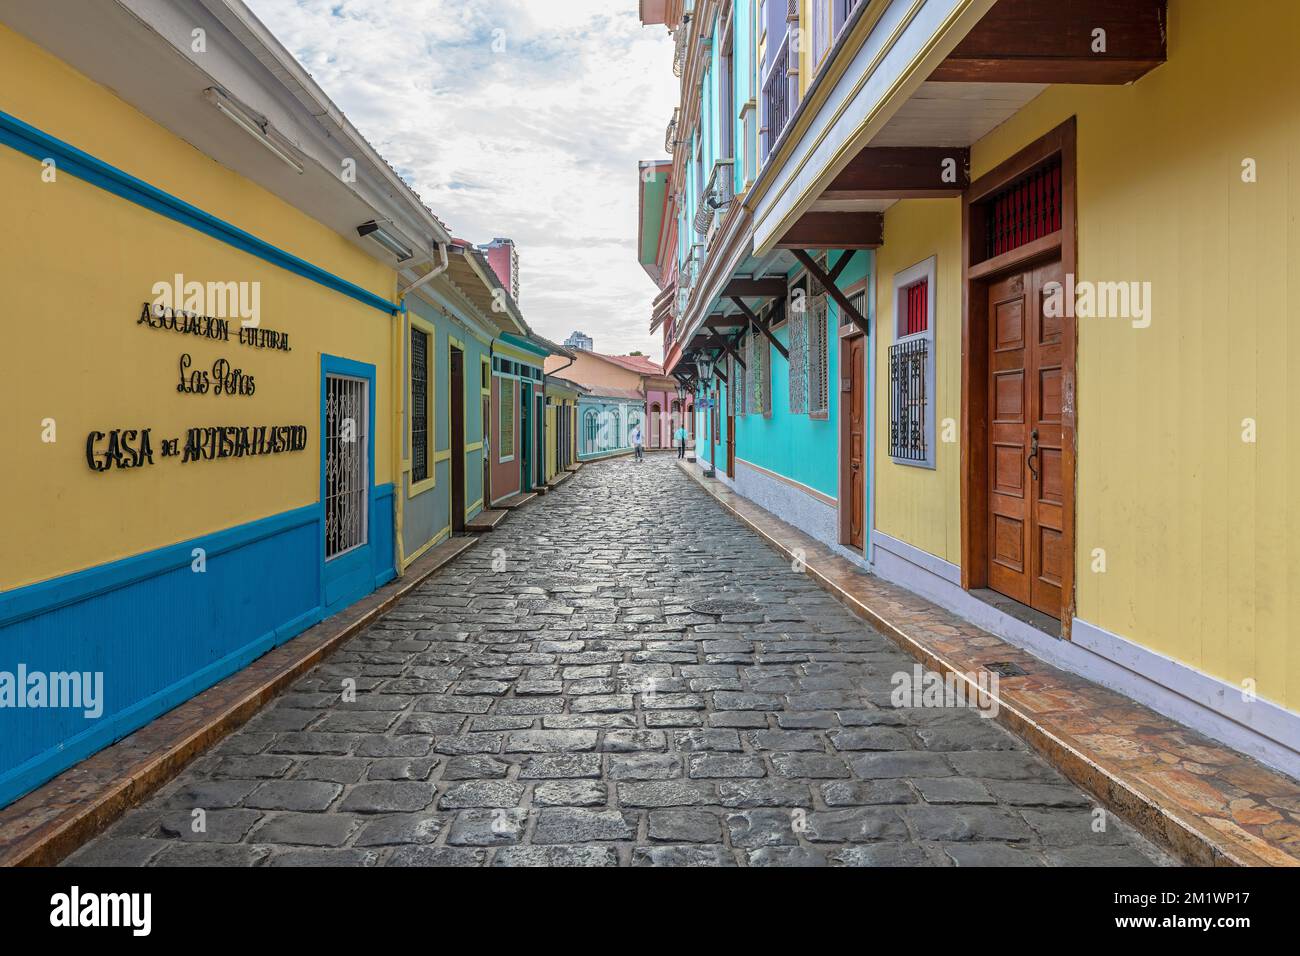 Colorful pedestrian street of Guayaquil with cobblestones and traditional colonial architecture, Guayaquil, Ecuador. Stock Photo